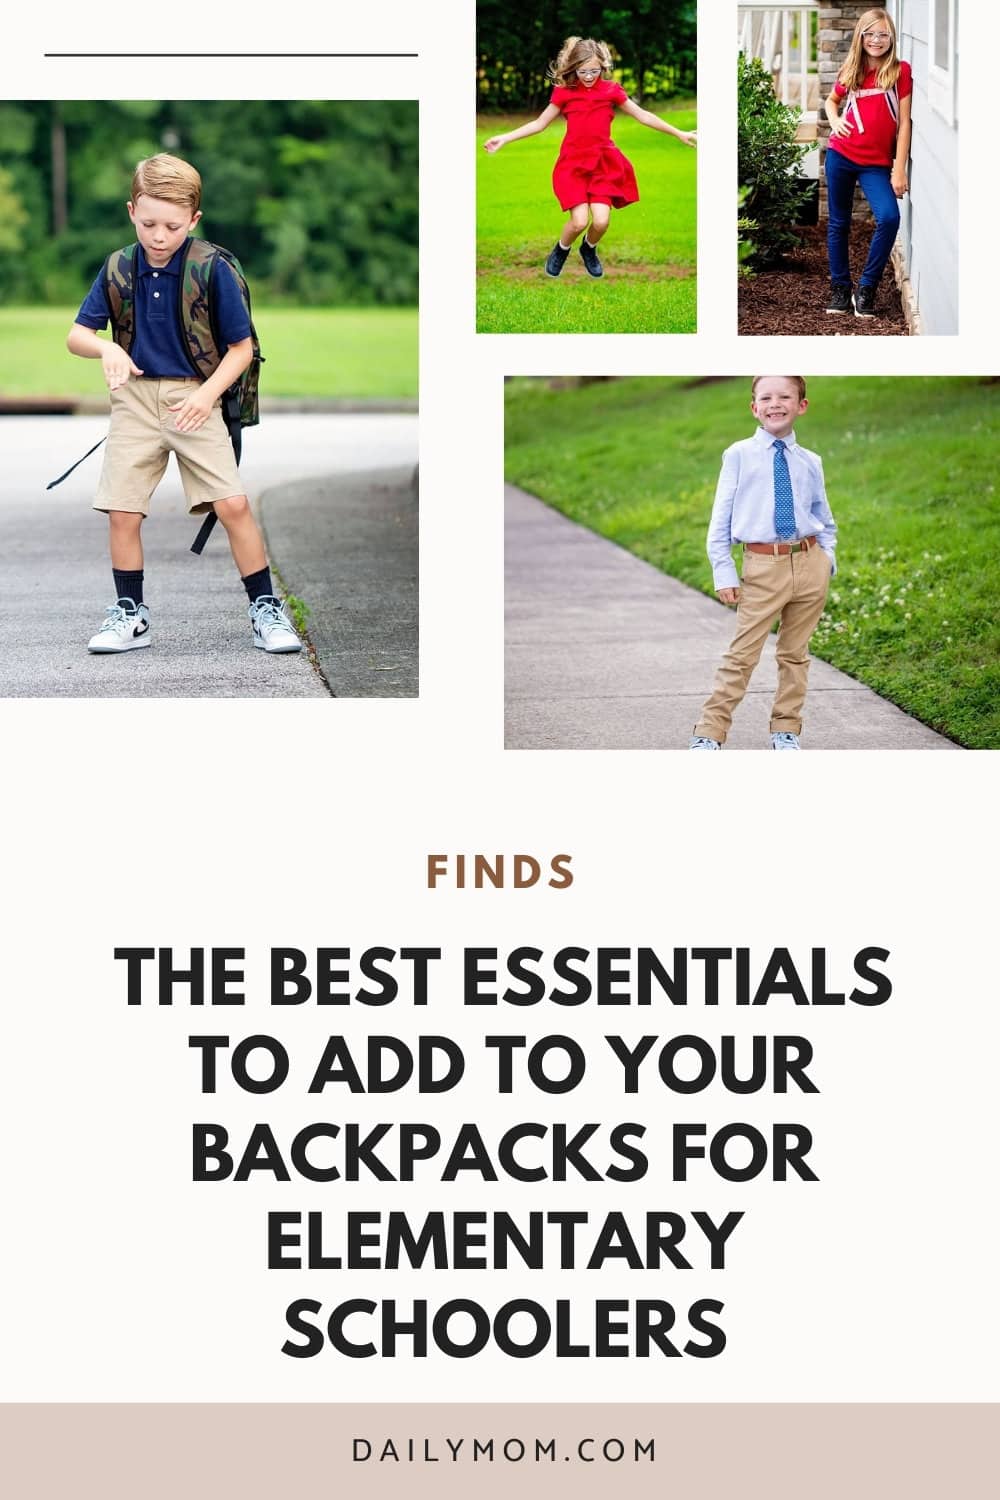 Daily Mom Parent Portal Backpacks For Elementary Schoolers Pin